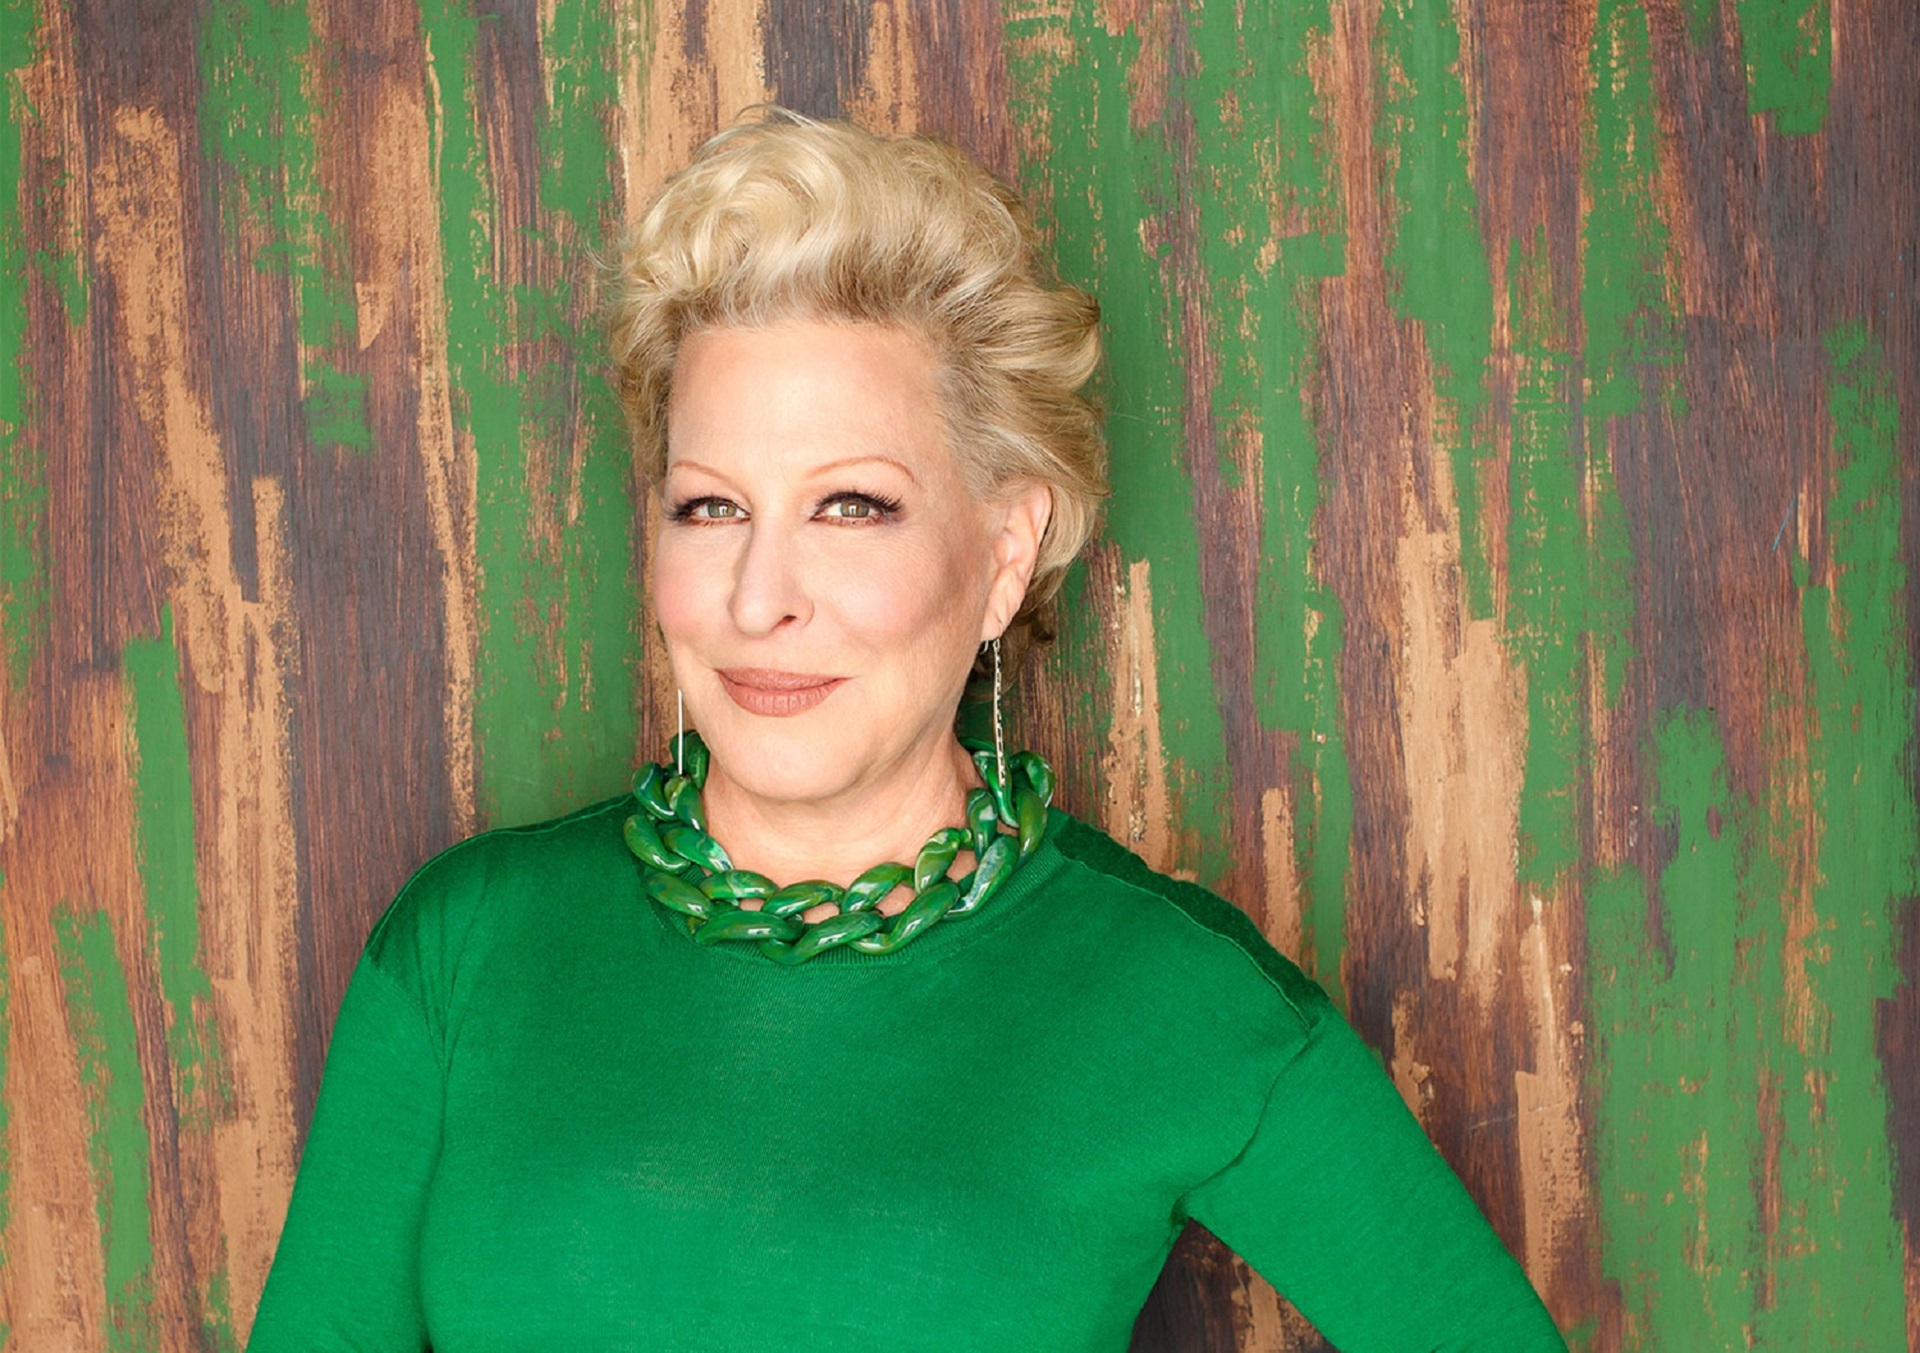 Bette Midler Wallpapers Images Photos Pictures Backgrounds. 